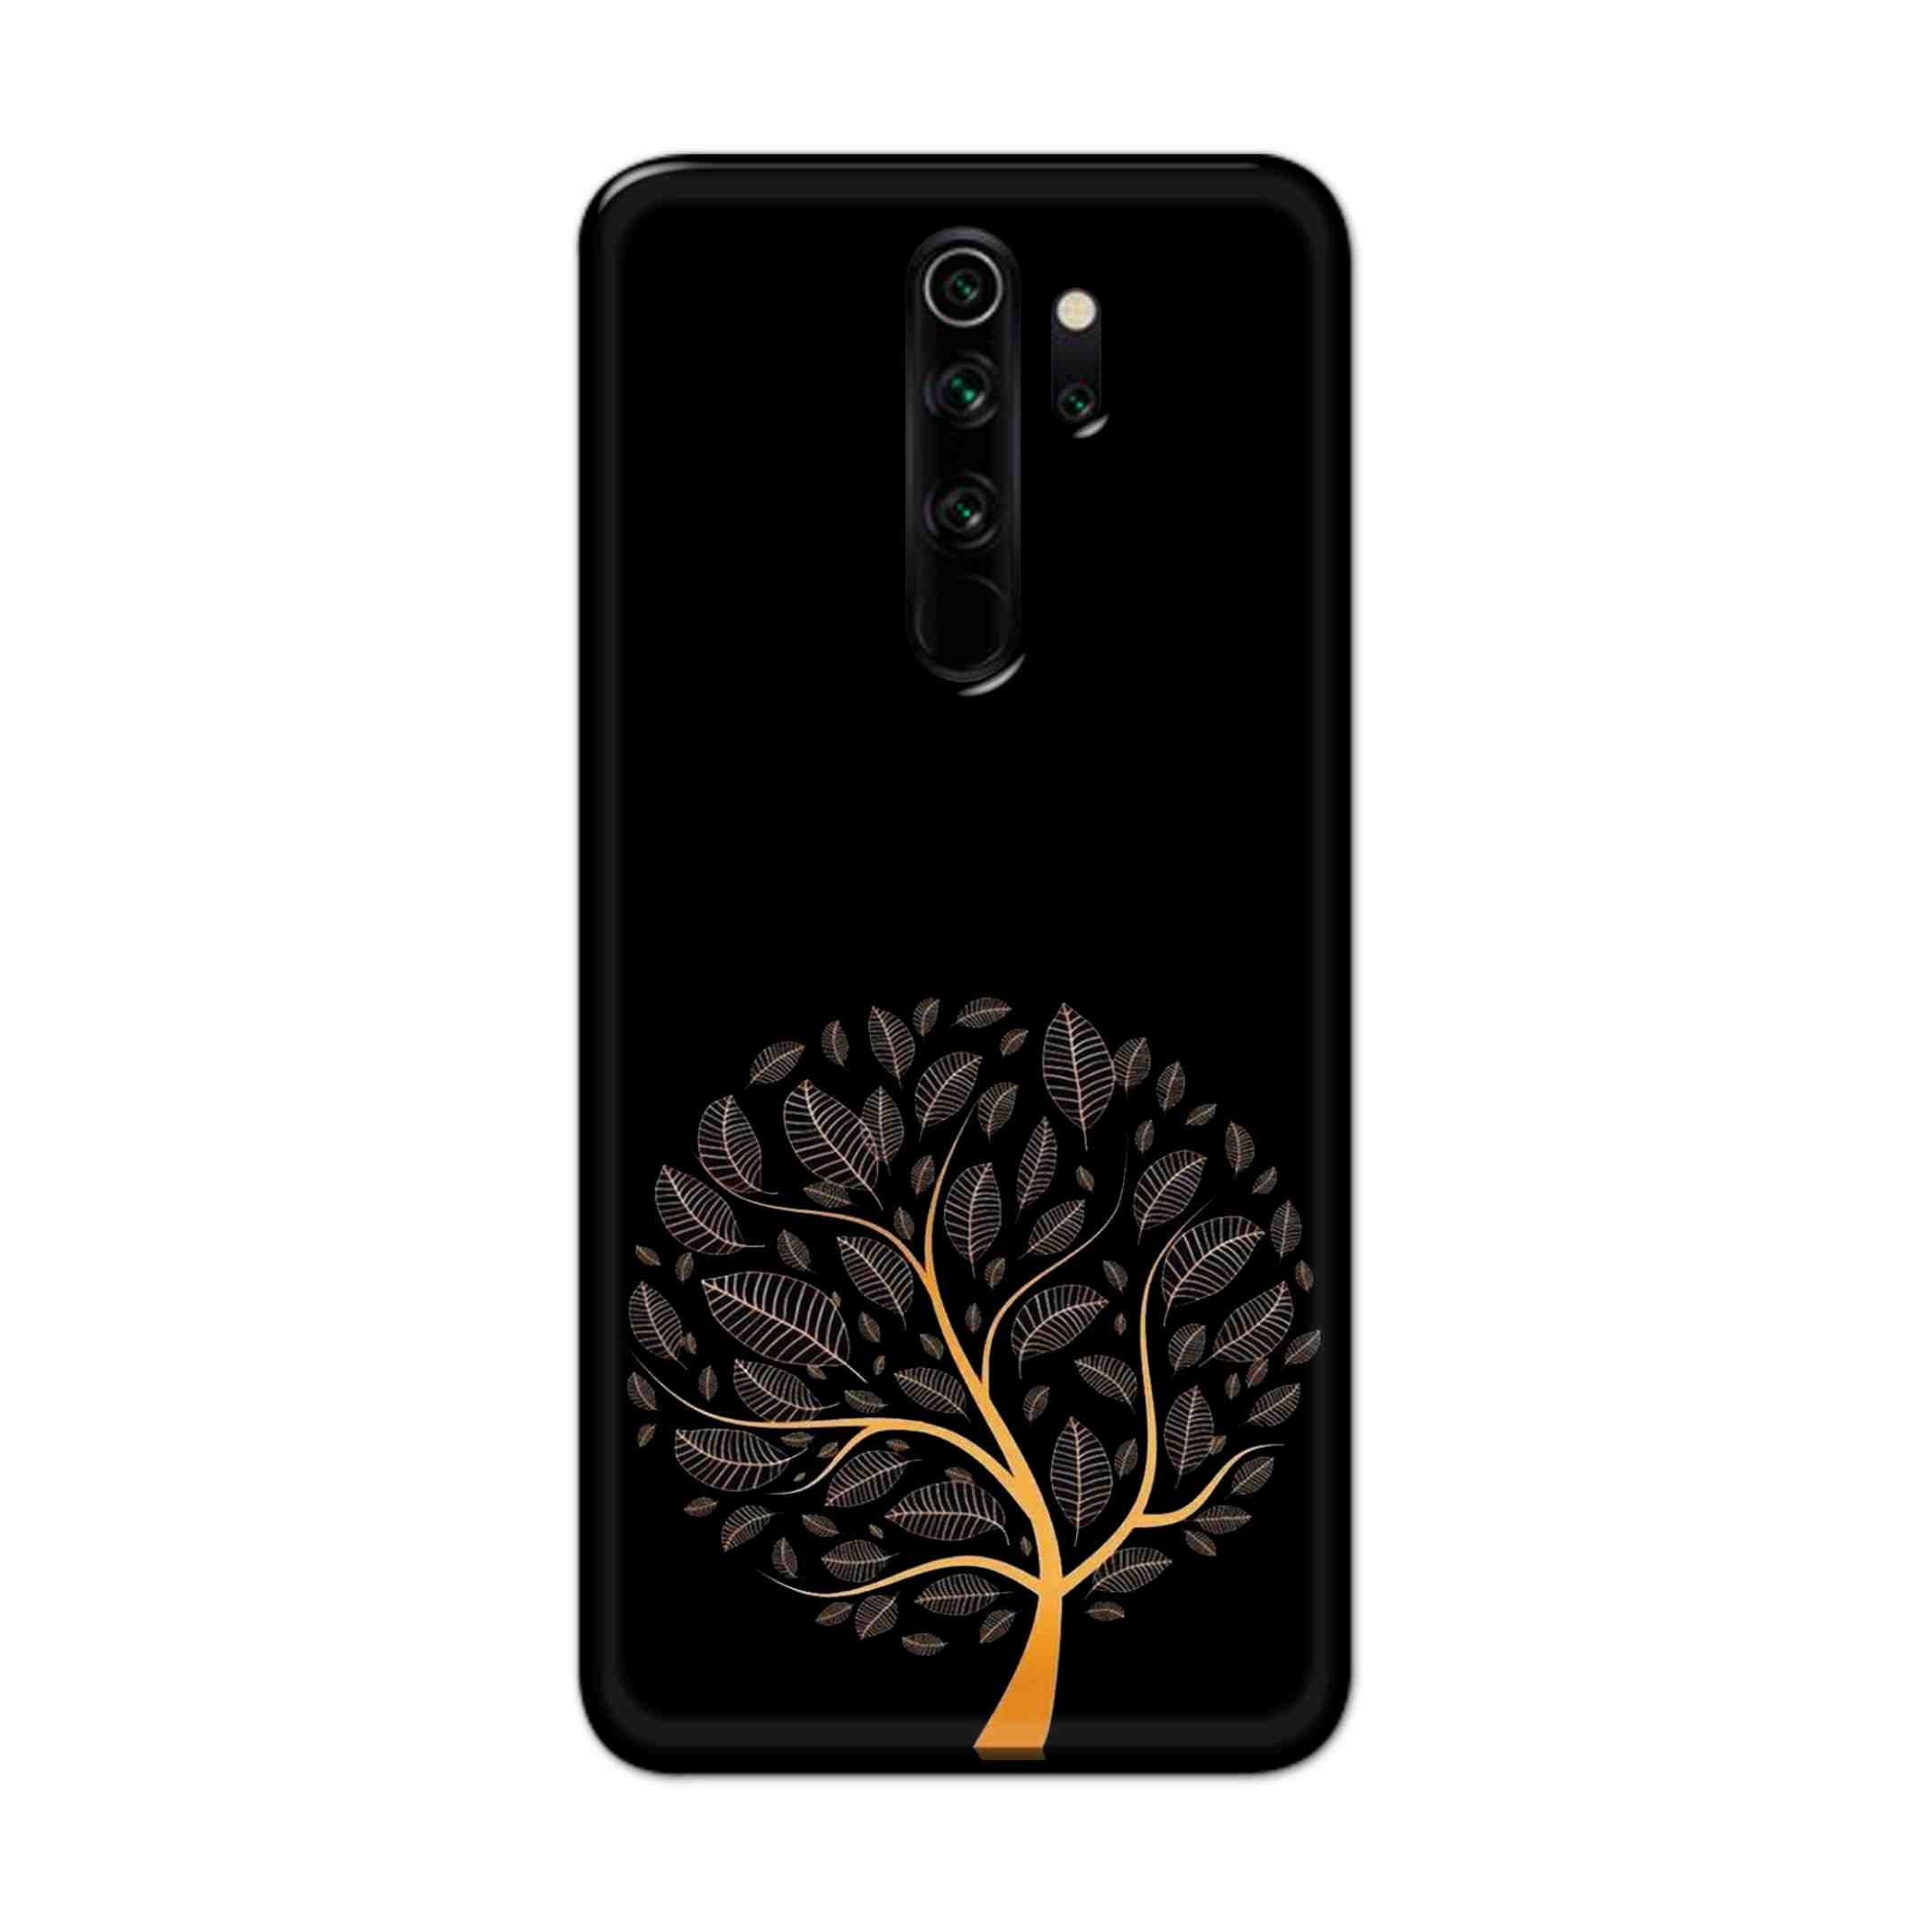 Buy Golden Tree Hard Back Mobile Phone Case Cover For Xiaomi Redmi Note 8 Pro Online